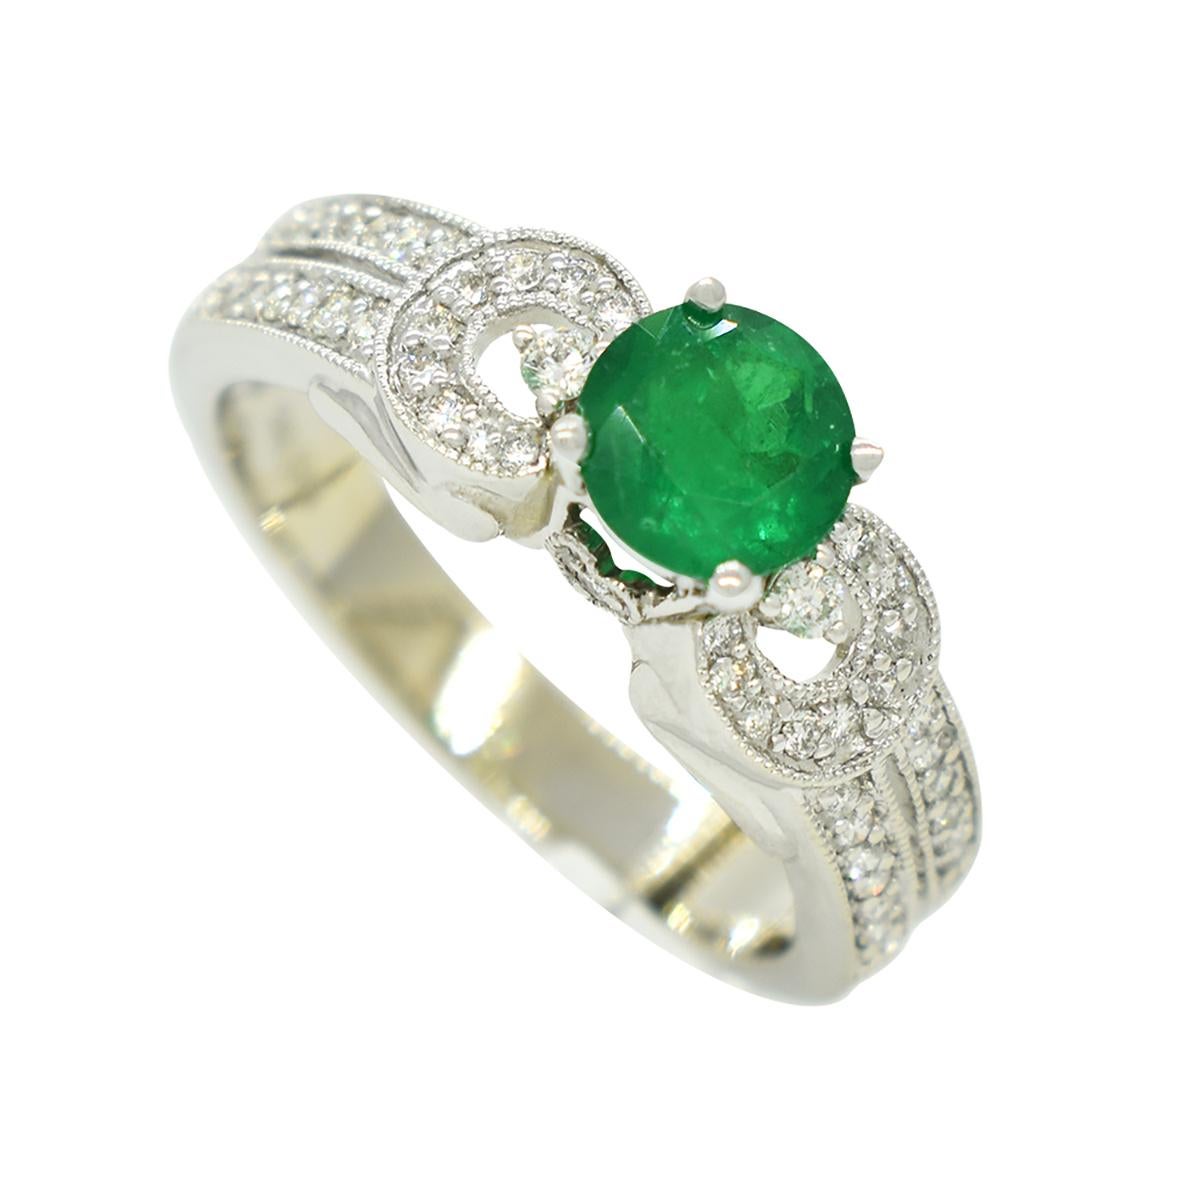 This emerald and diamond ring is a masterpiece crafted from solid 14K white gold. Its focal point is a stunning 0.67-carat round-cut emerald, radiating a deep, mesmerizing dark green hue. The emerald's intense color saturation commands the